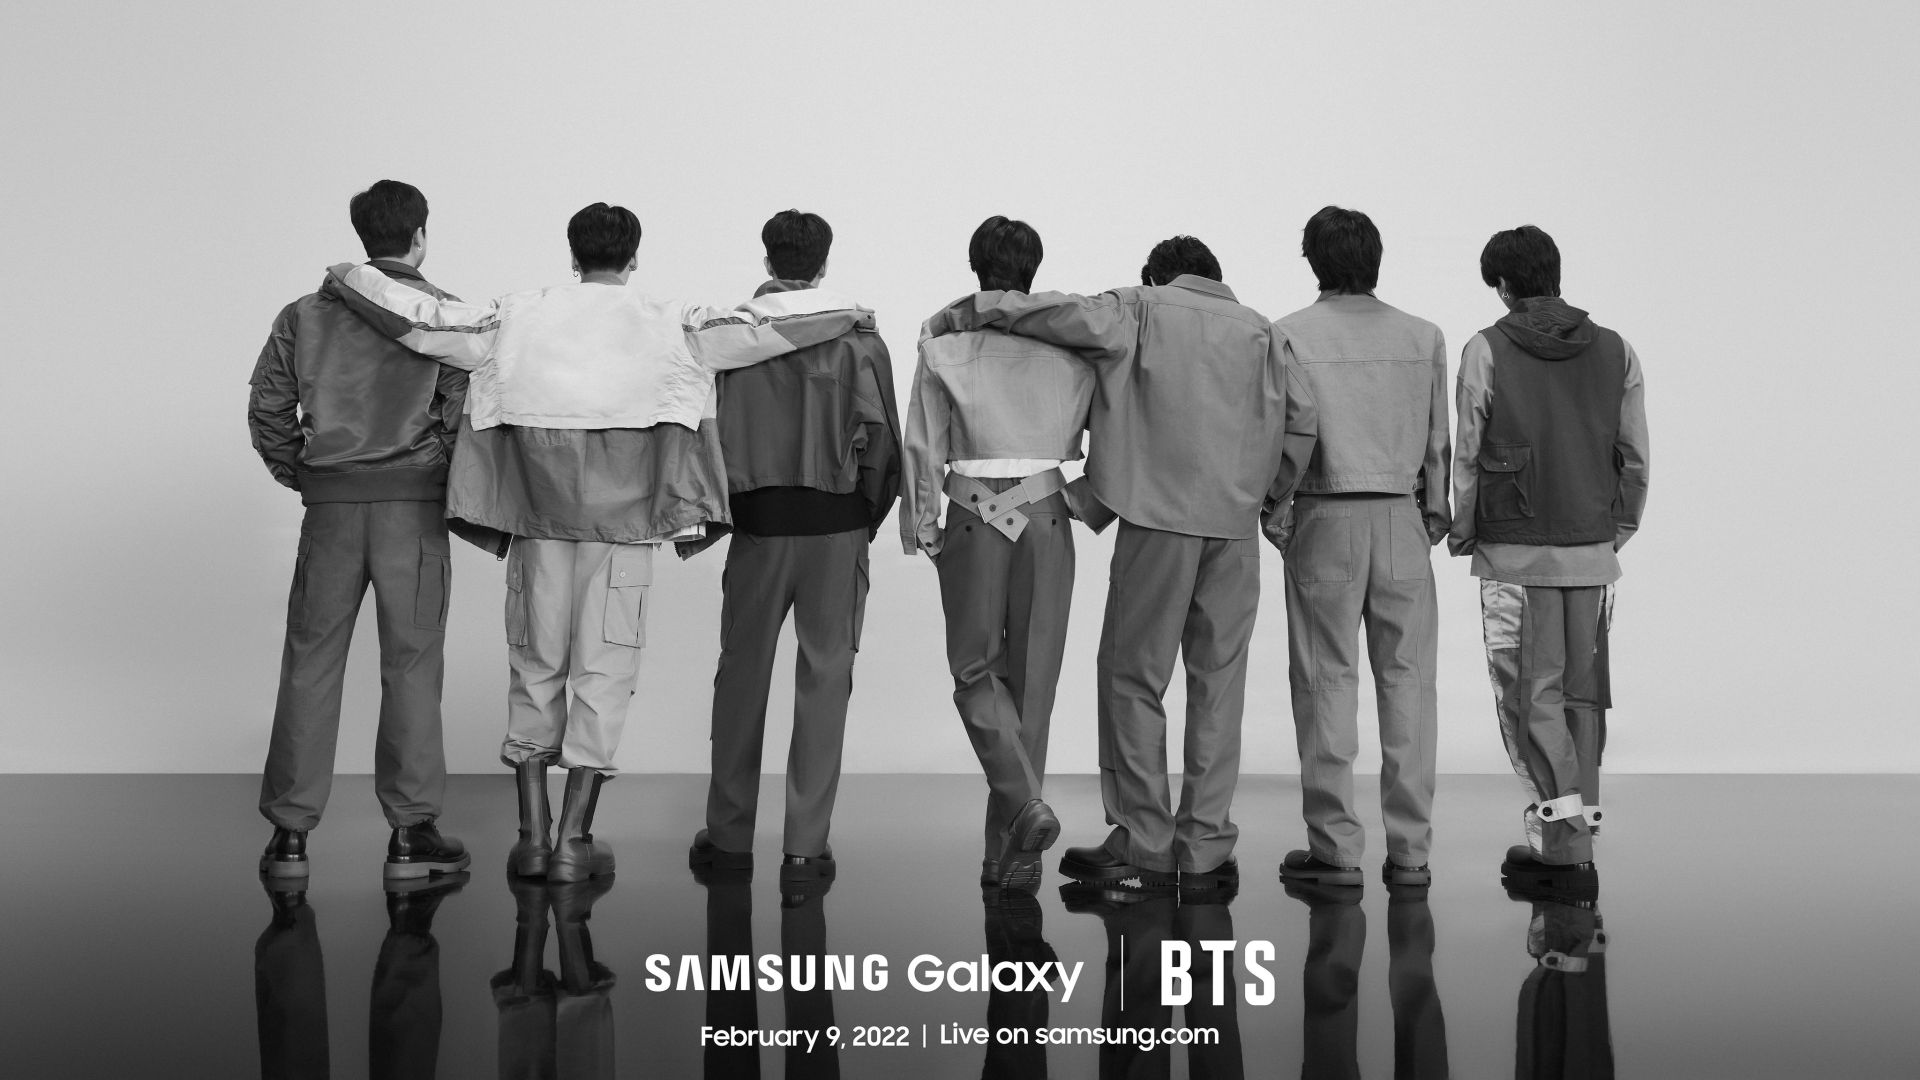 Samsung hints at partnership with BTS - Entertainment - The